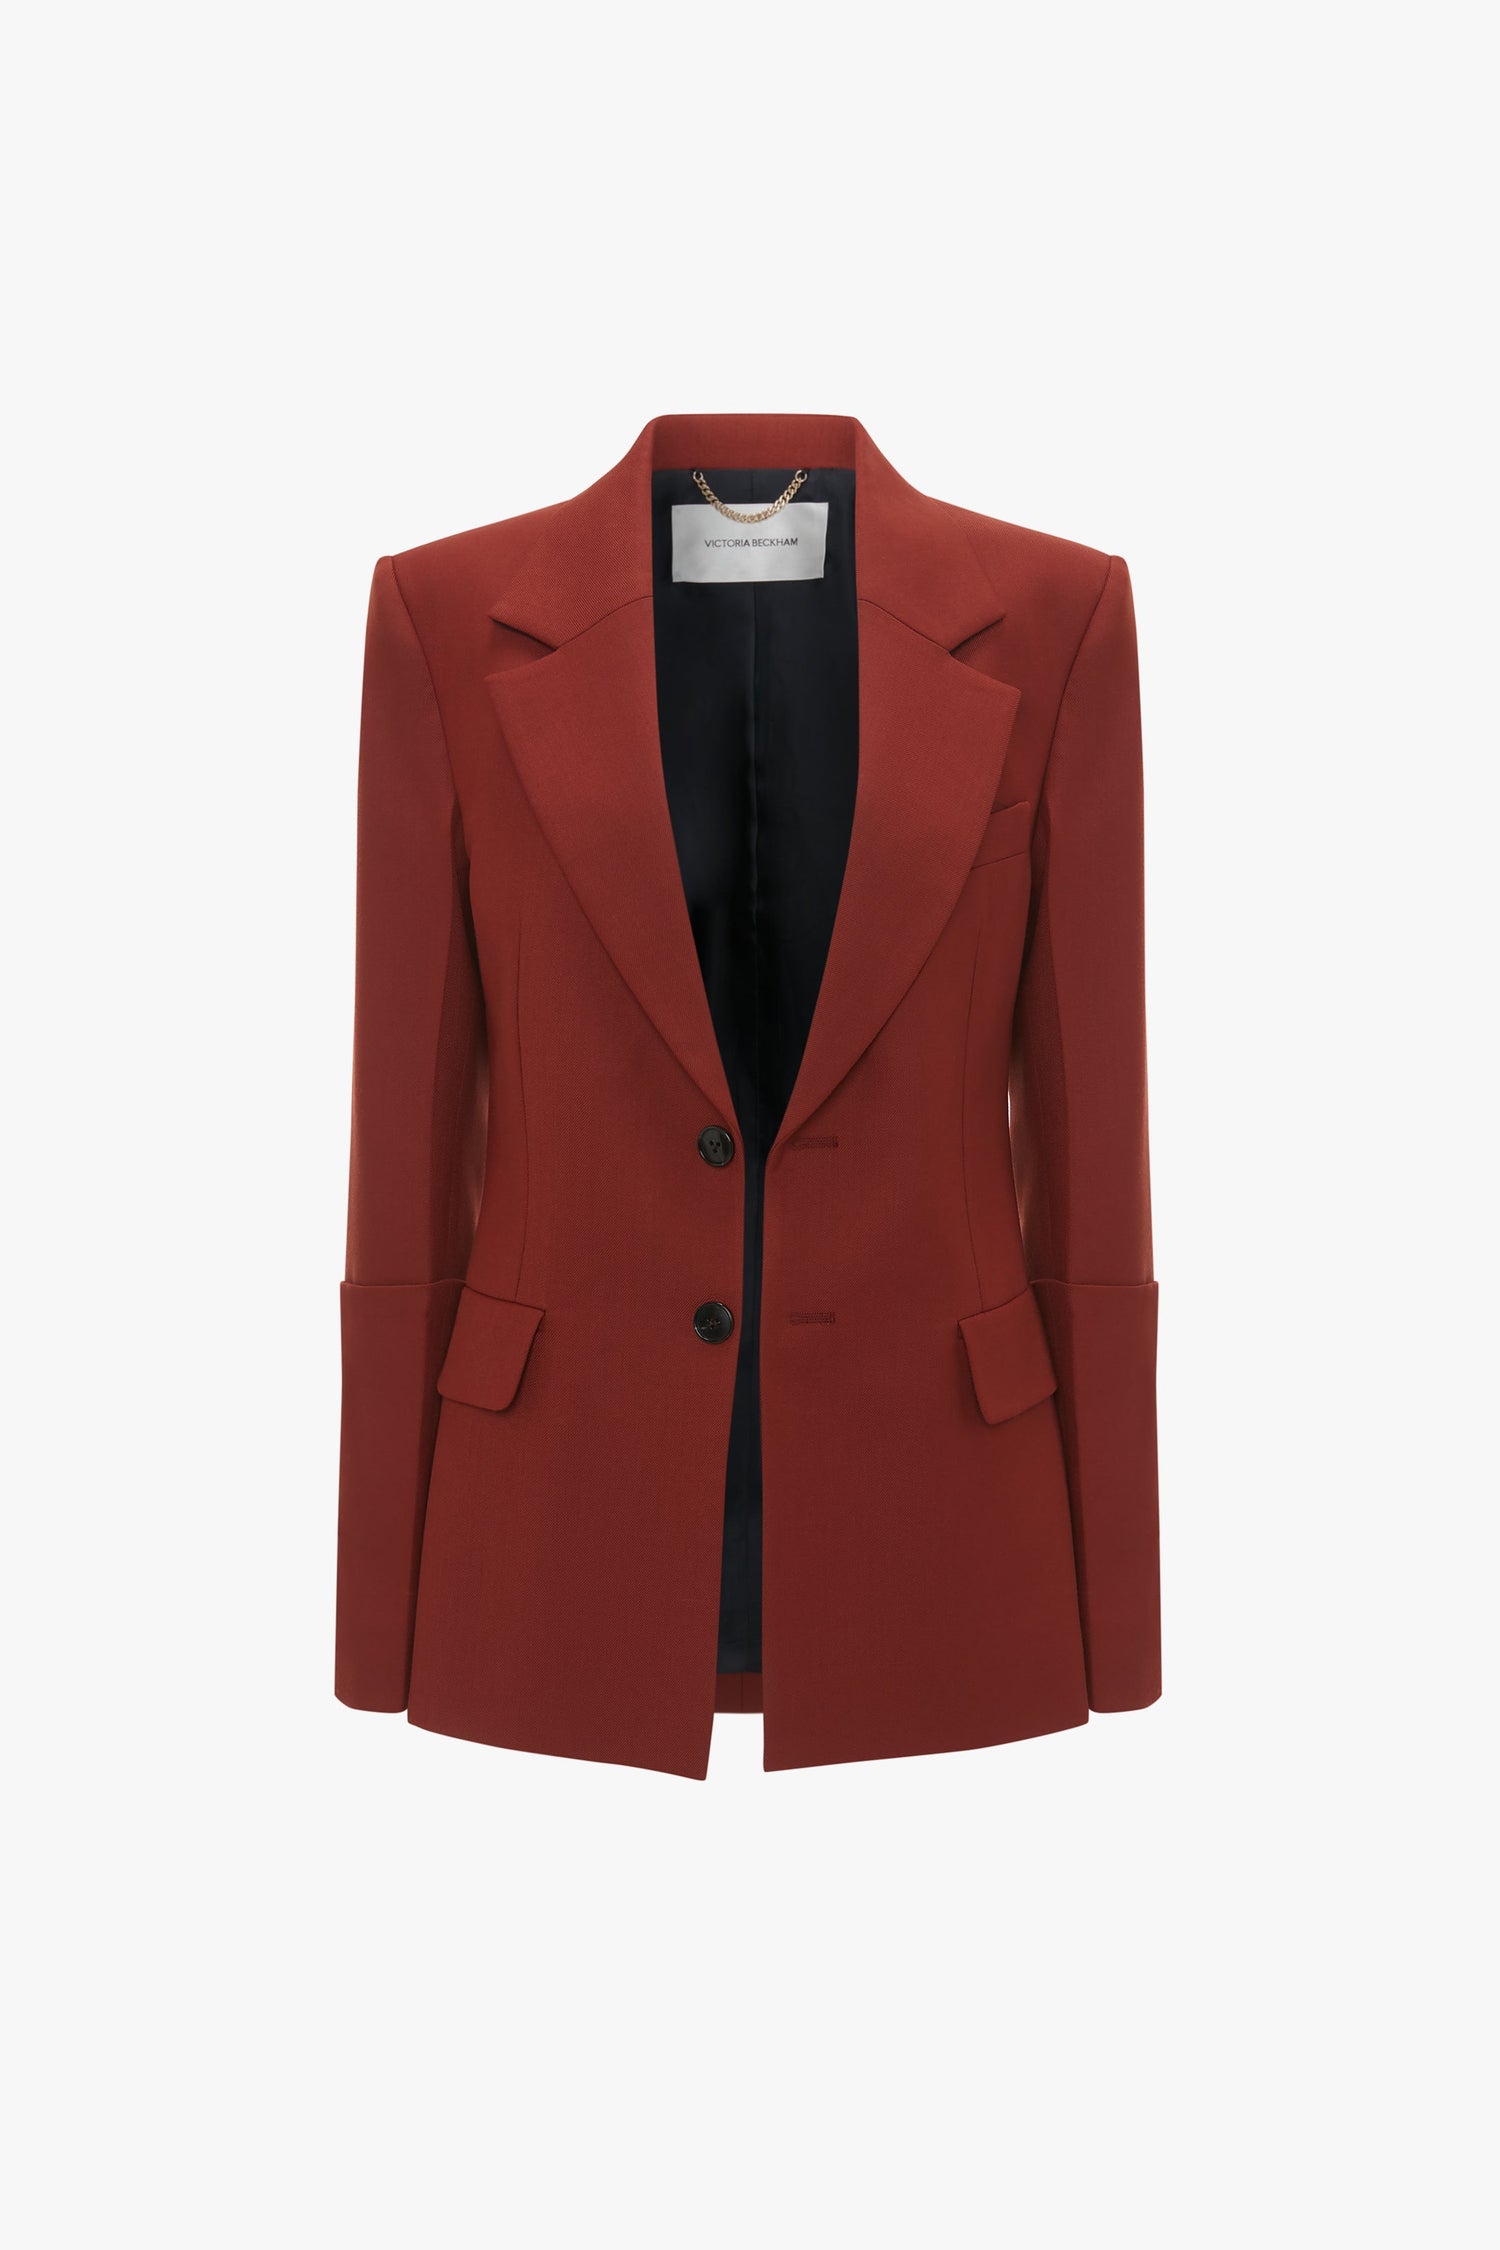 A stylish, russet women's Sleeve Detail Patch Pocket Jacket In Russet with contemporary detailing, featuring peaked lapels, two buttons, and two front flap pockets from Victoria Beckham, displayed against a white background.